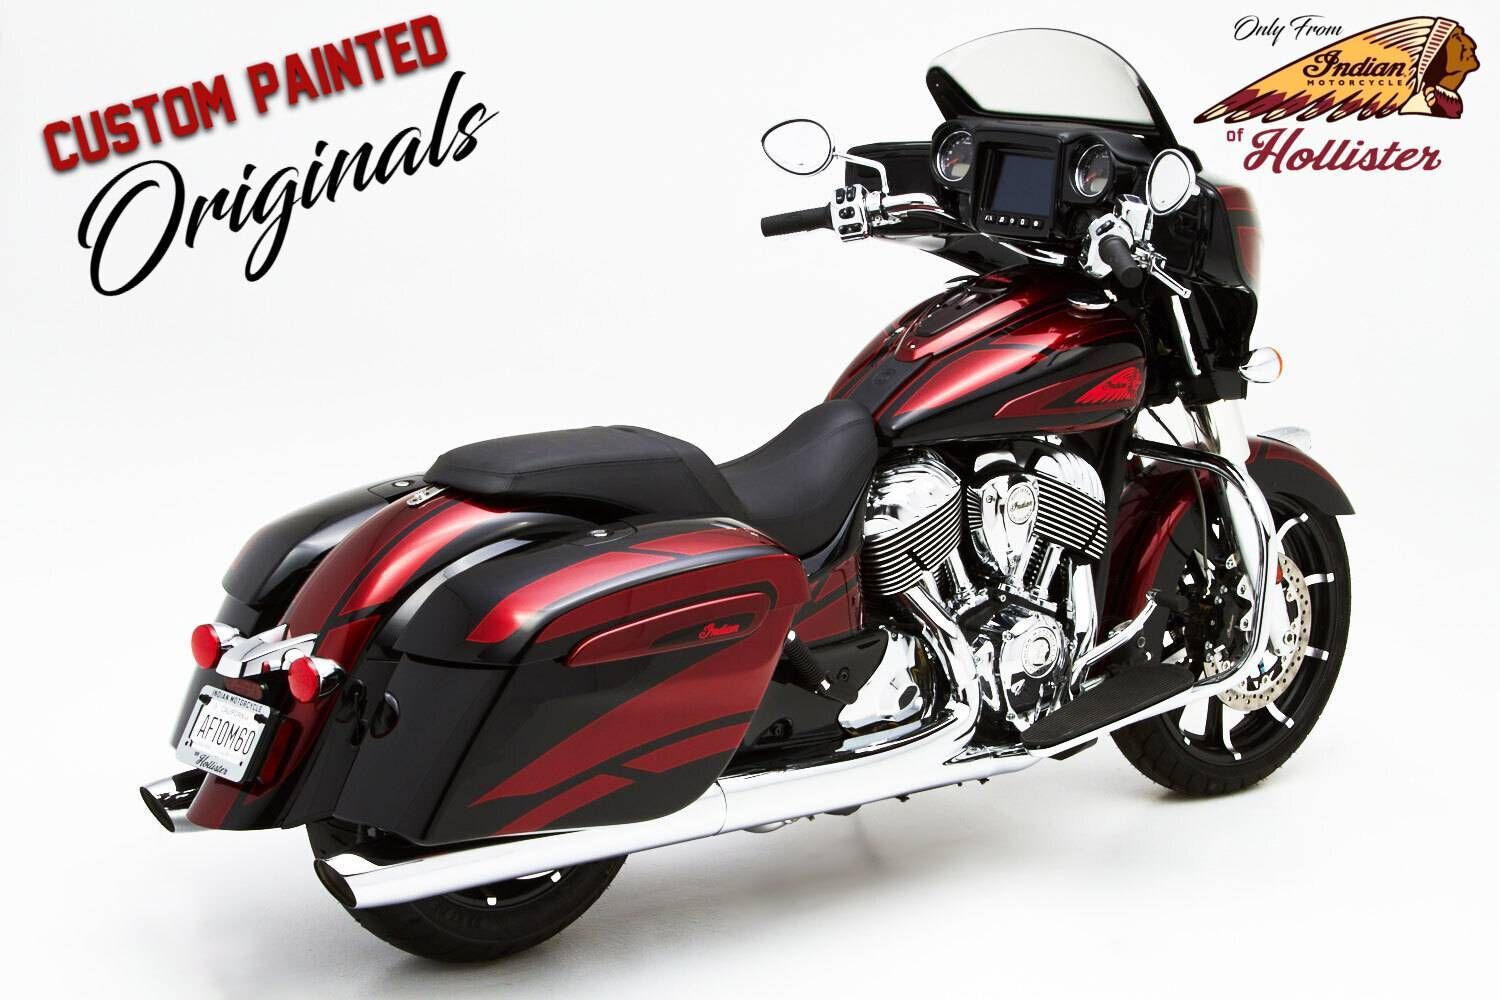 2022 Indian Motorcycle Chieftain® Limited in Hollister, California - Photo 3